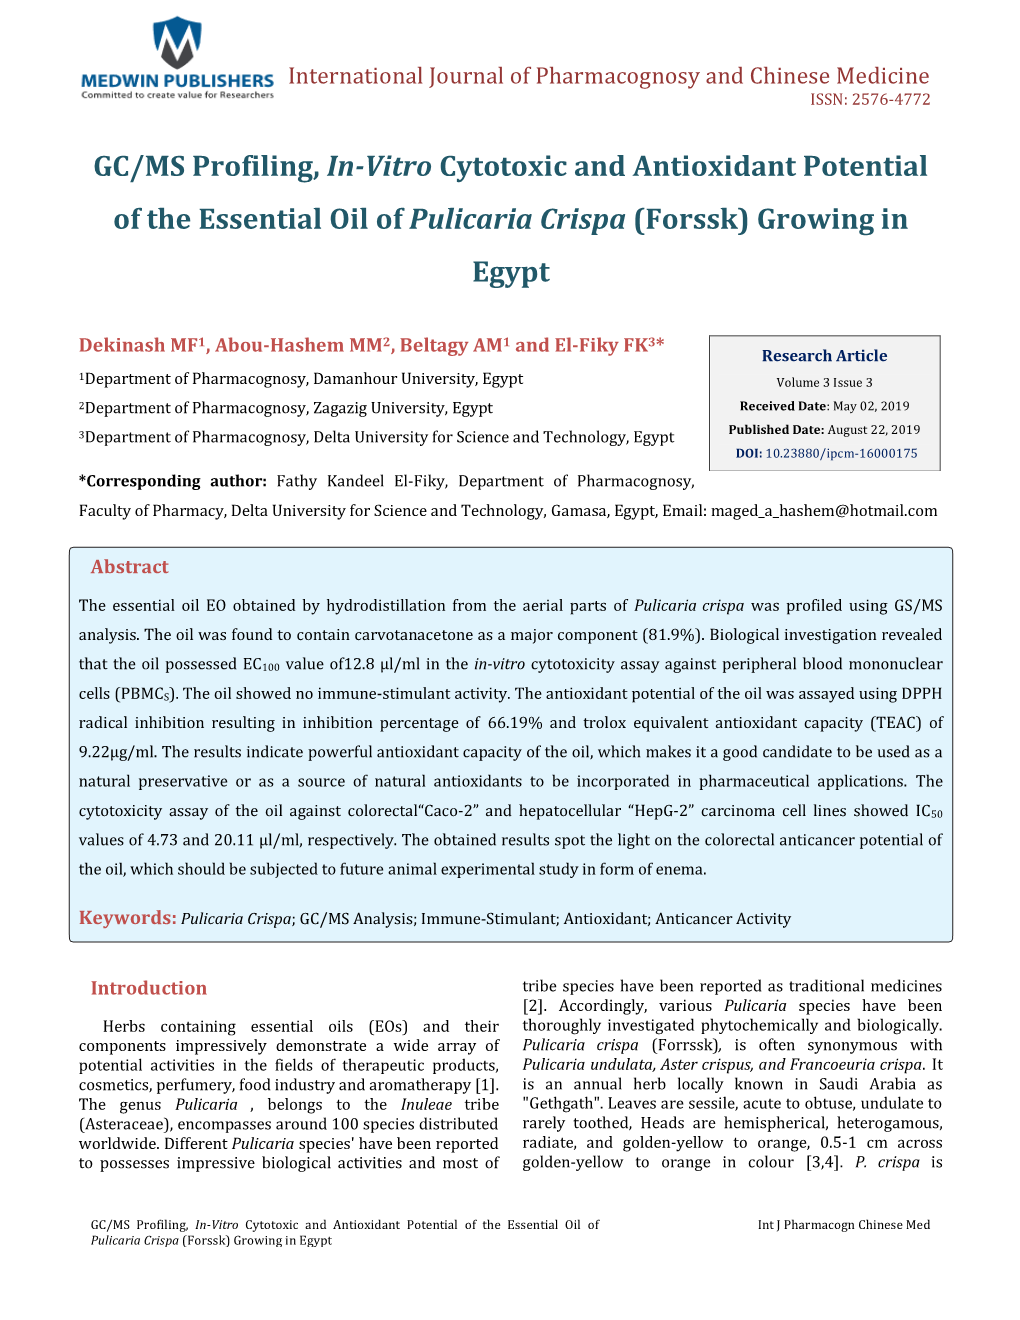 GC/MS Profiling, In-Vitro Cytotoxic and Antioxidant Potential of the Essential Oil of Pulicaria Crispa (Forssk) Growing in Egypt